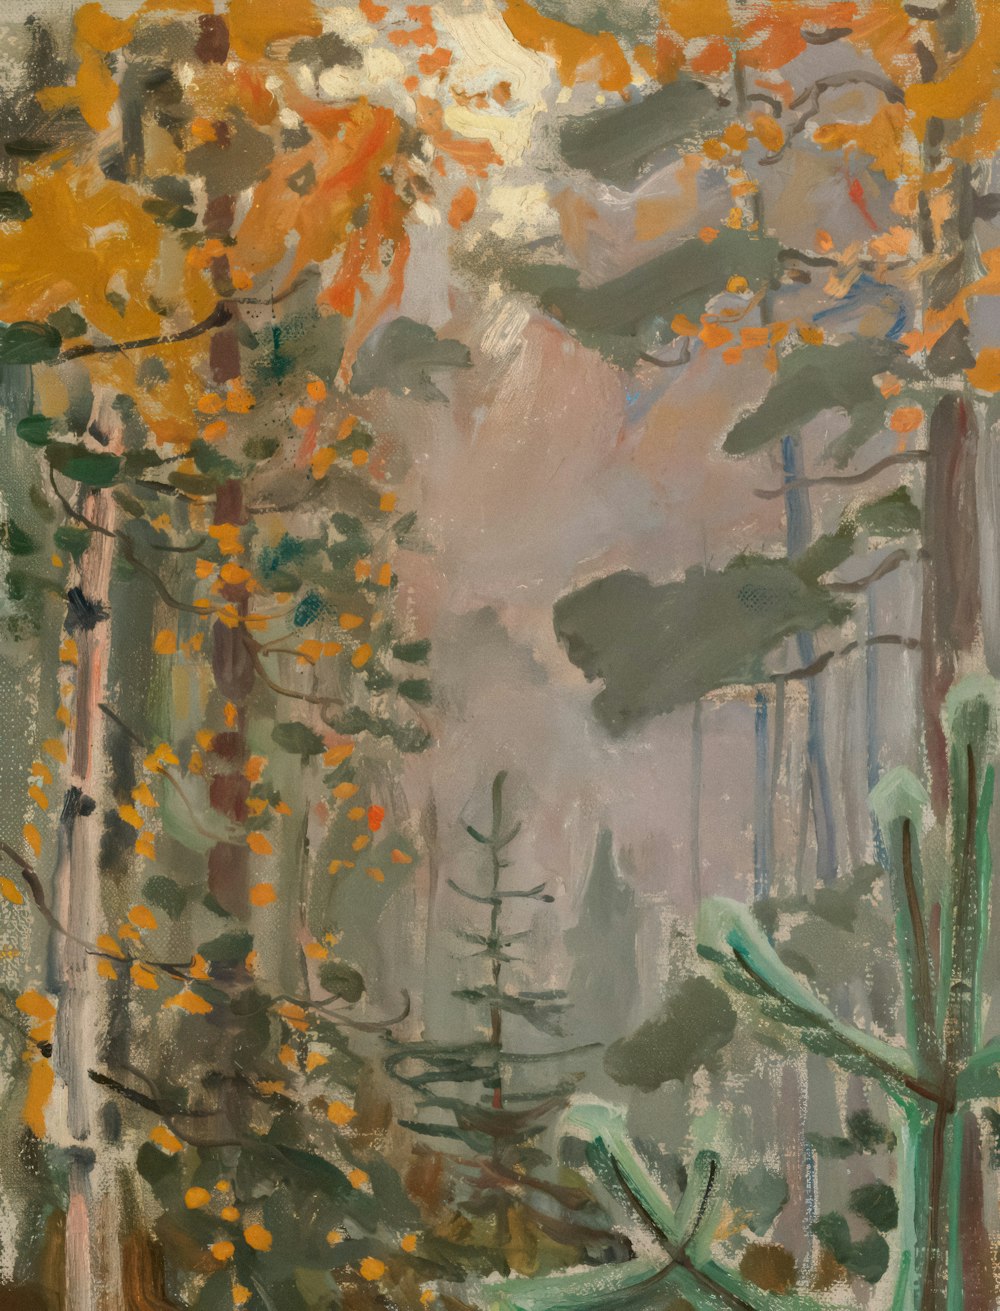 a painting of a forest filled with lots of trees